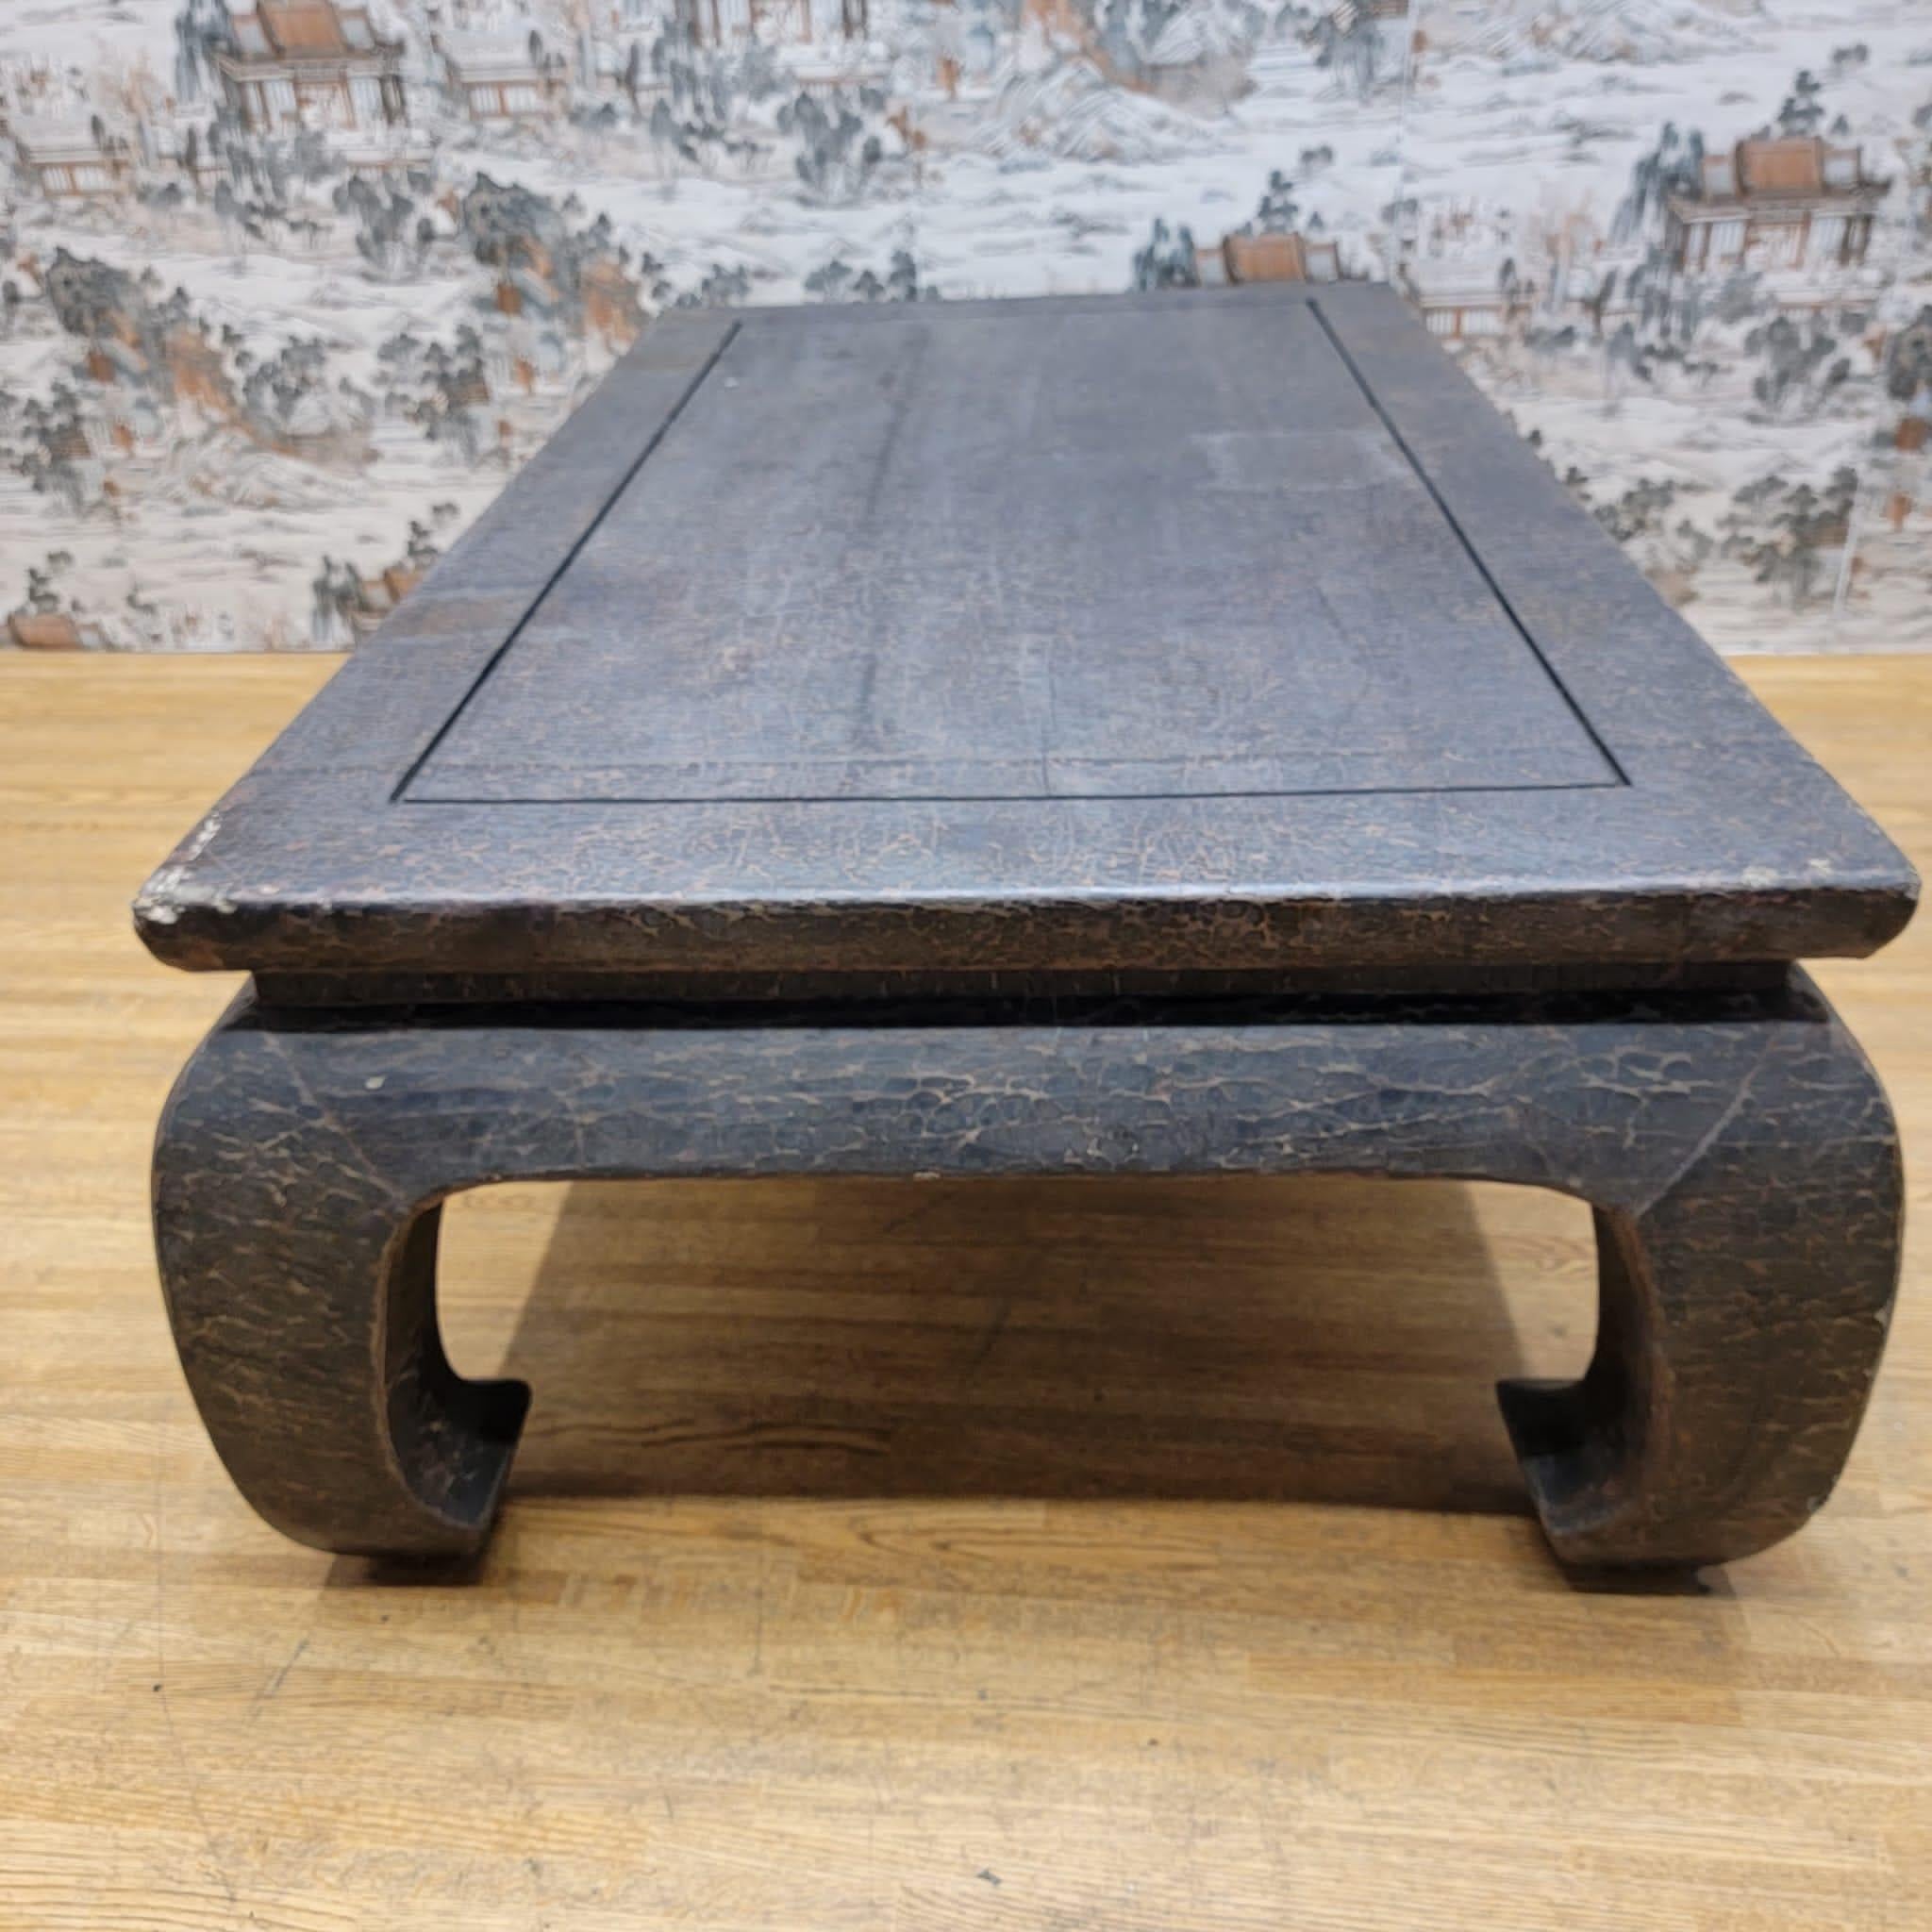 Antique Shanxi Province Linen Wrapped Lacquered Elm Coffee Table

Circa: 1900

Dimensions:

W: 55